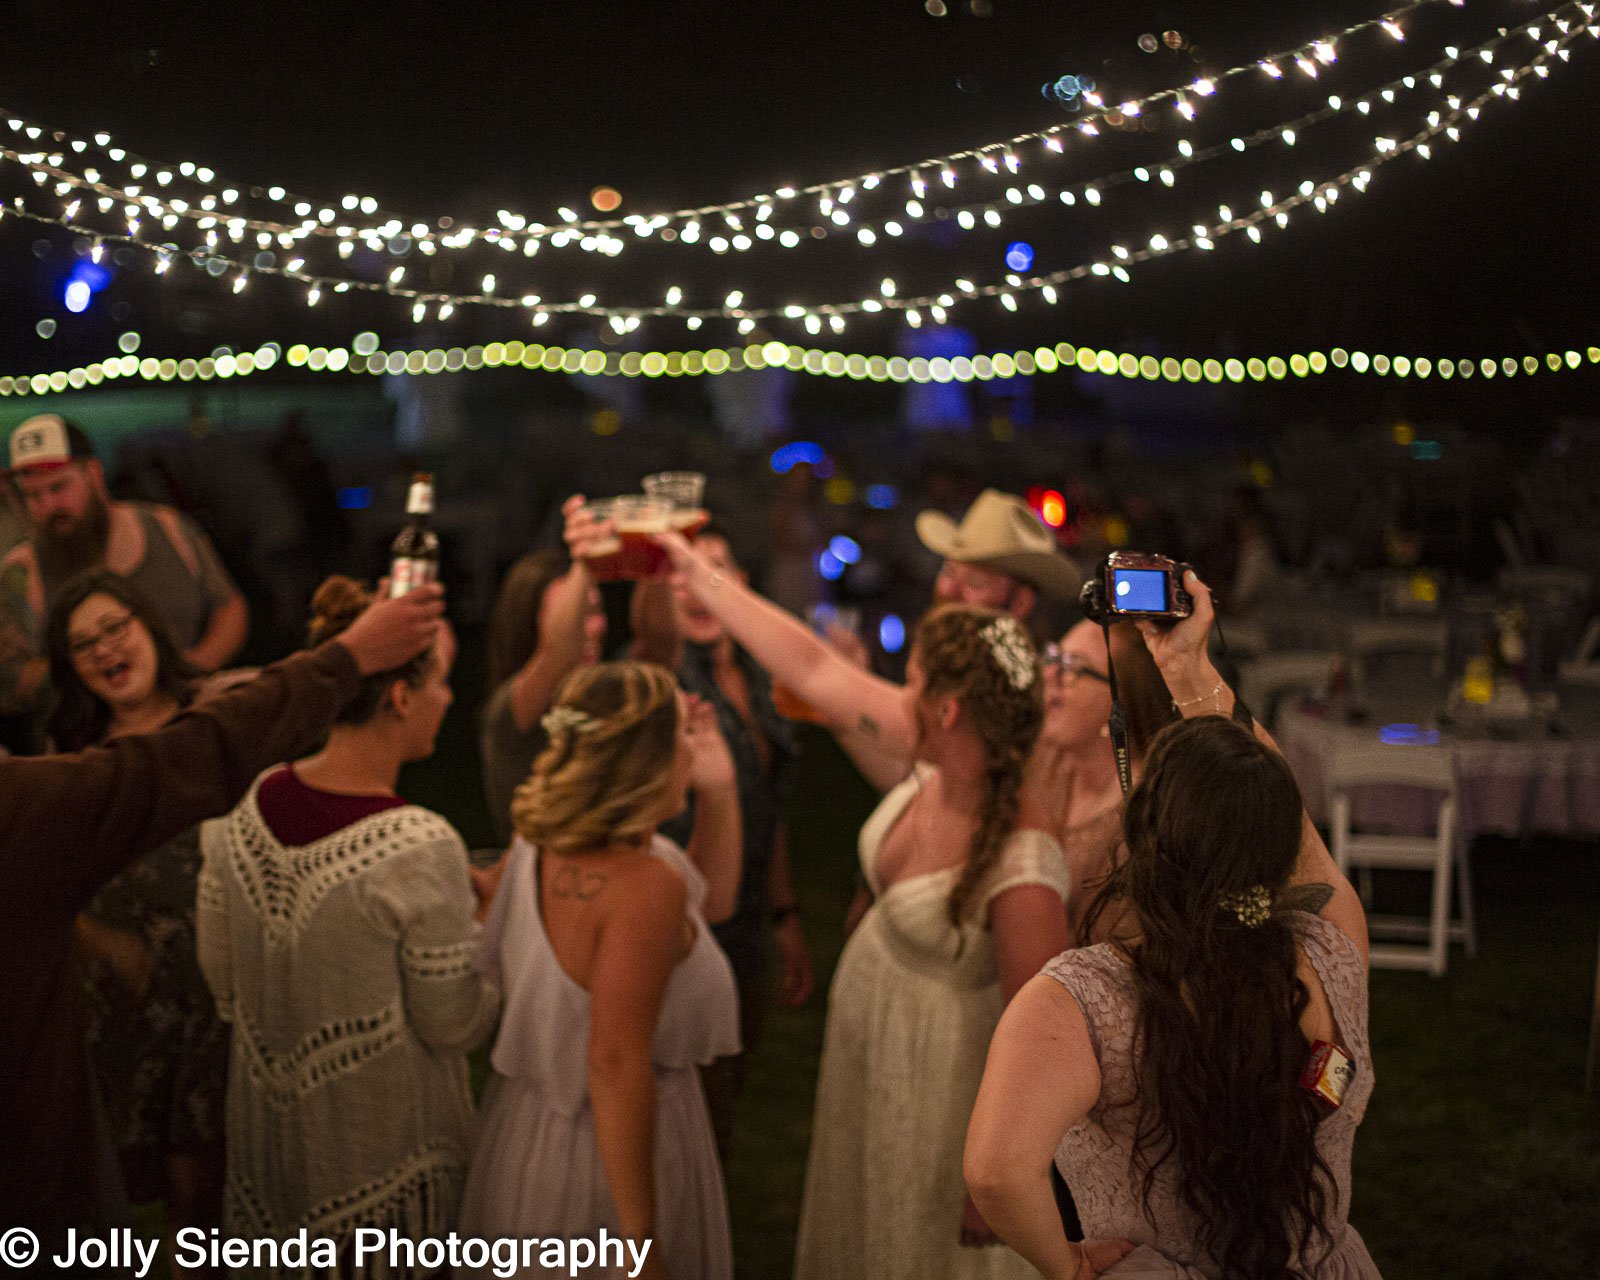 Kitsap county wedding receptions by Jolly Sienda Photography and